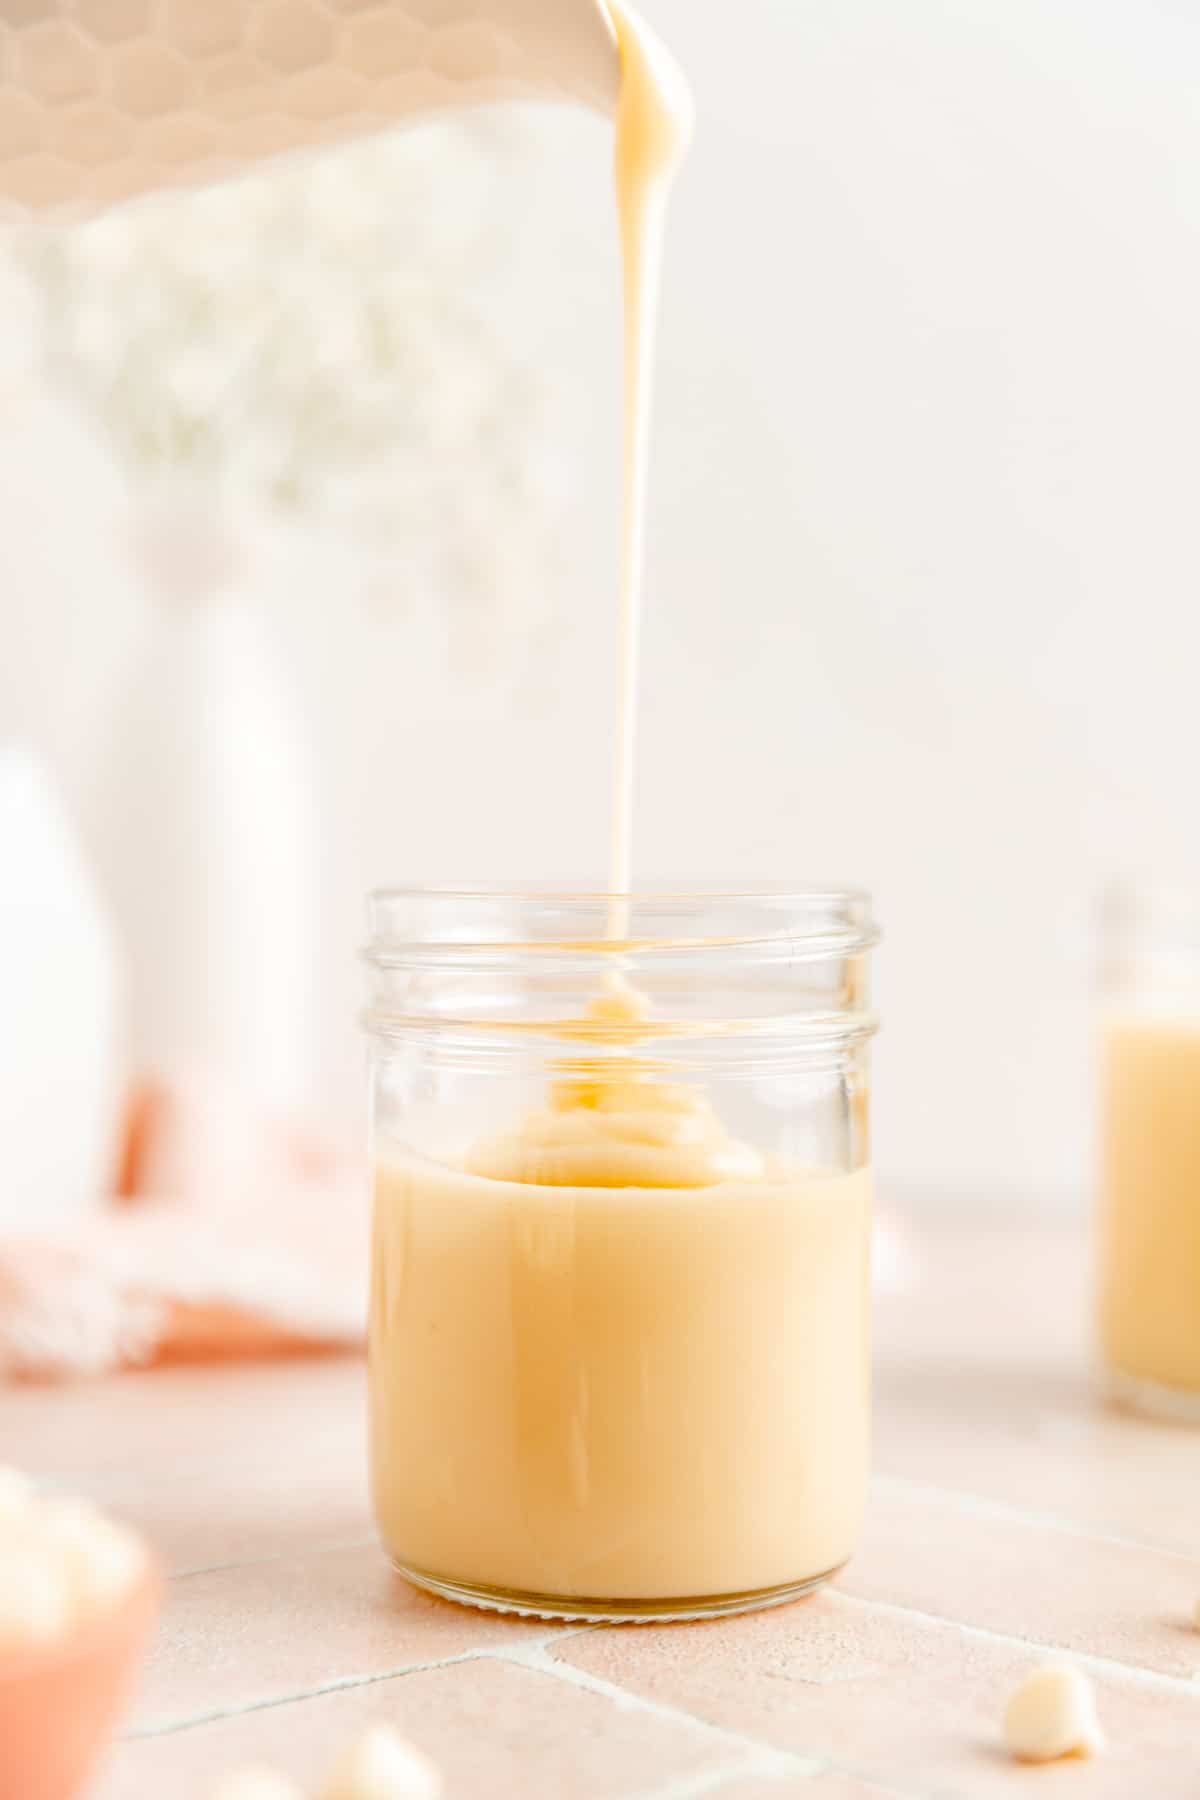 White chocolate sauce pouring from pitcher in to clear mason jar on brick surface.